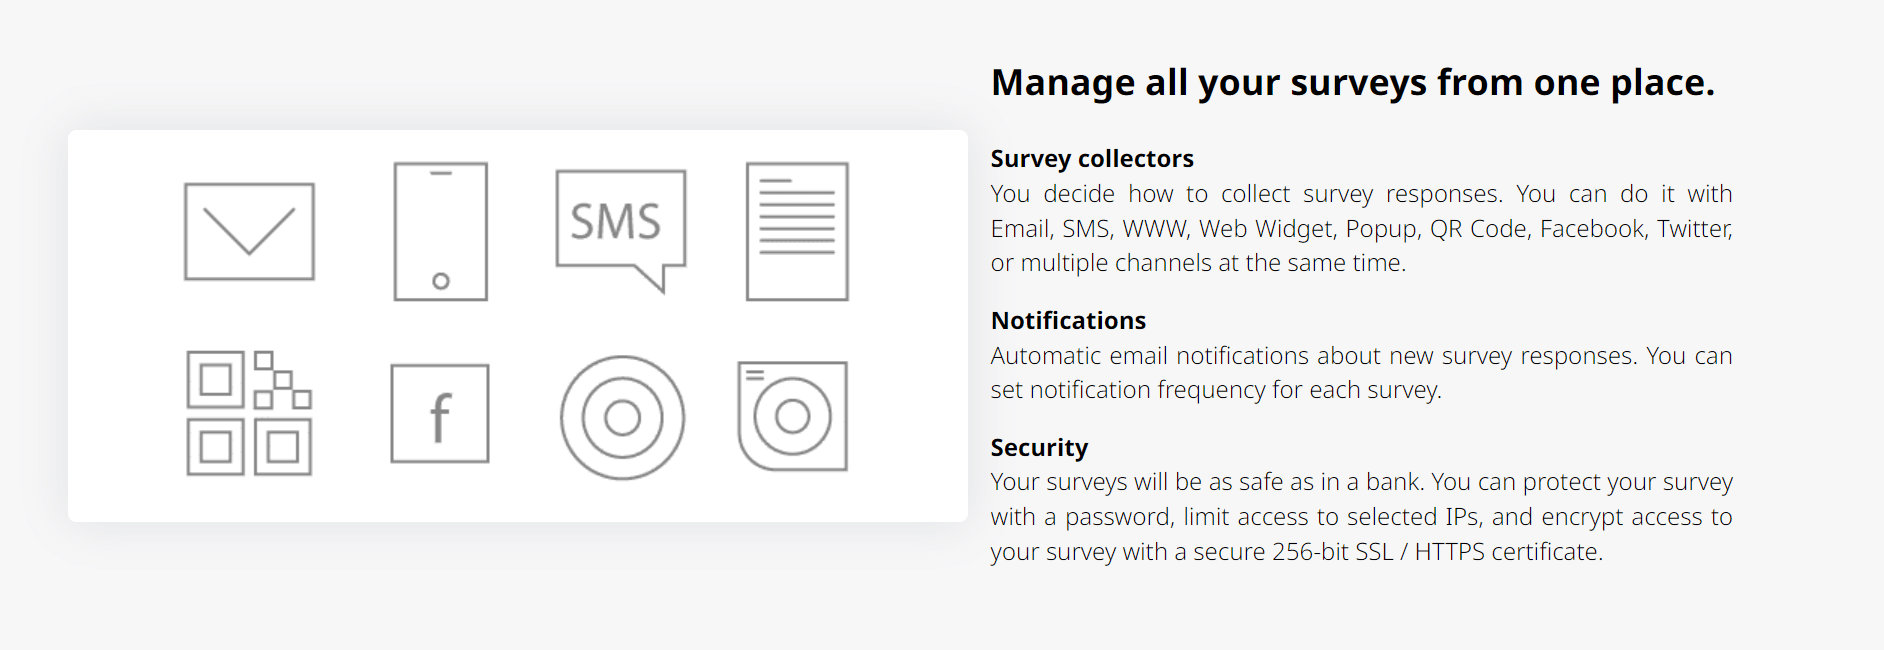 Surveylab for creating a NPS survey and improve customer experience